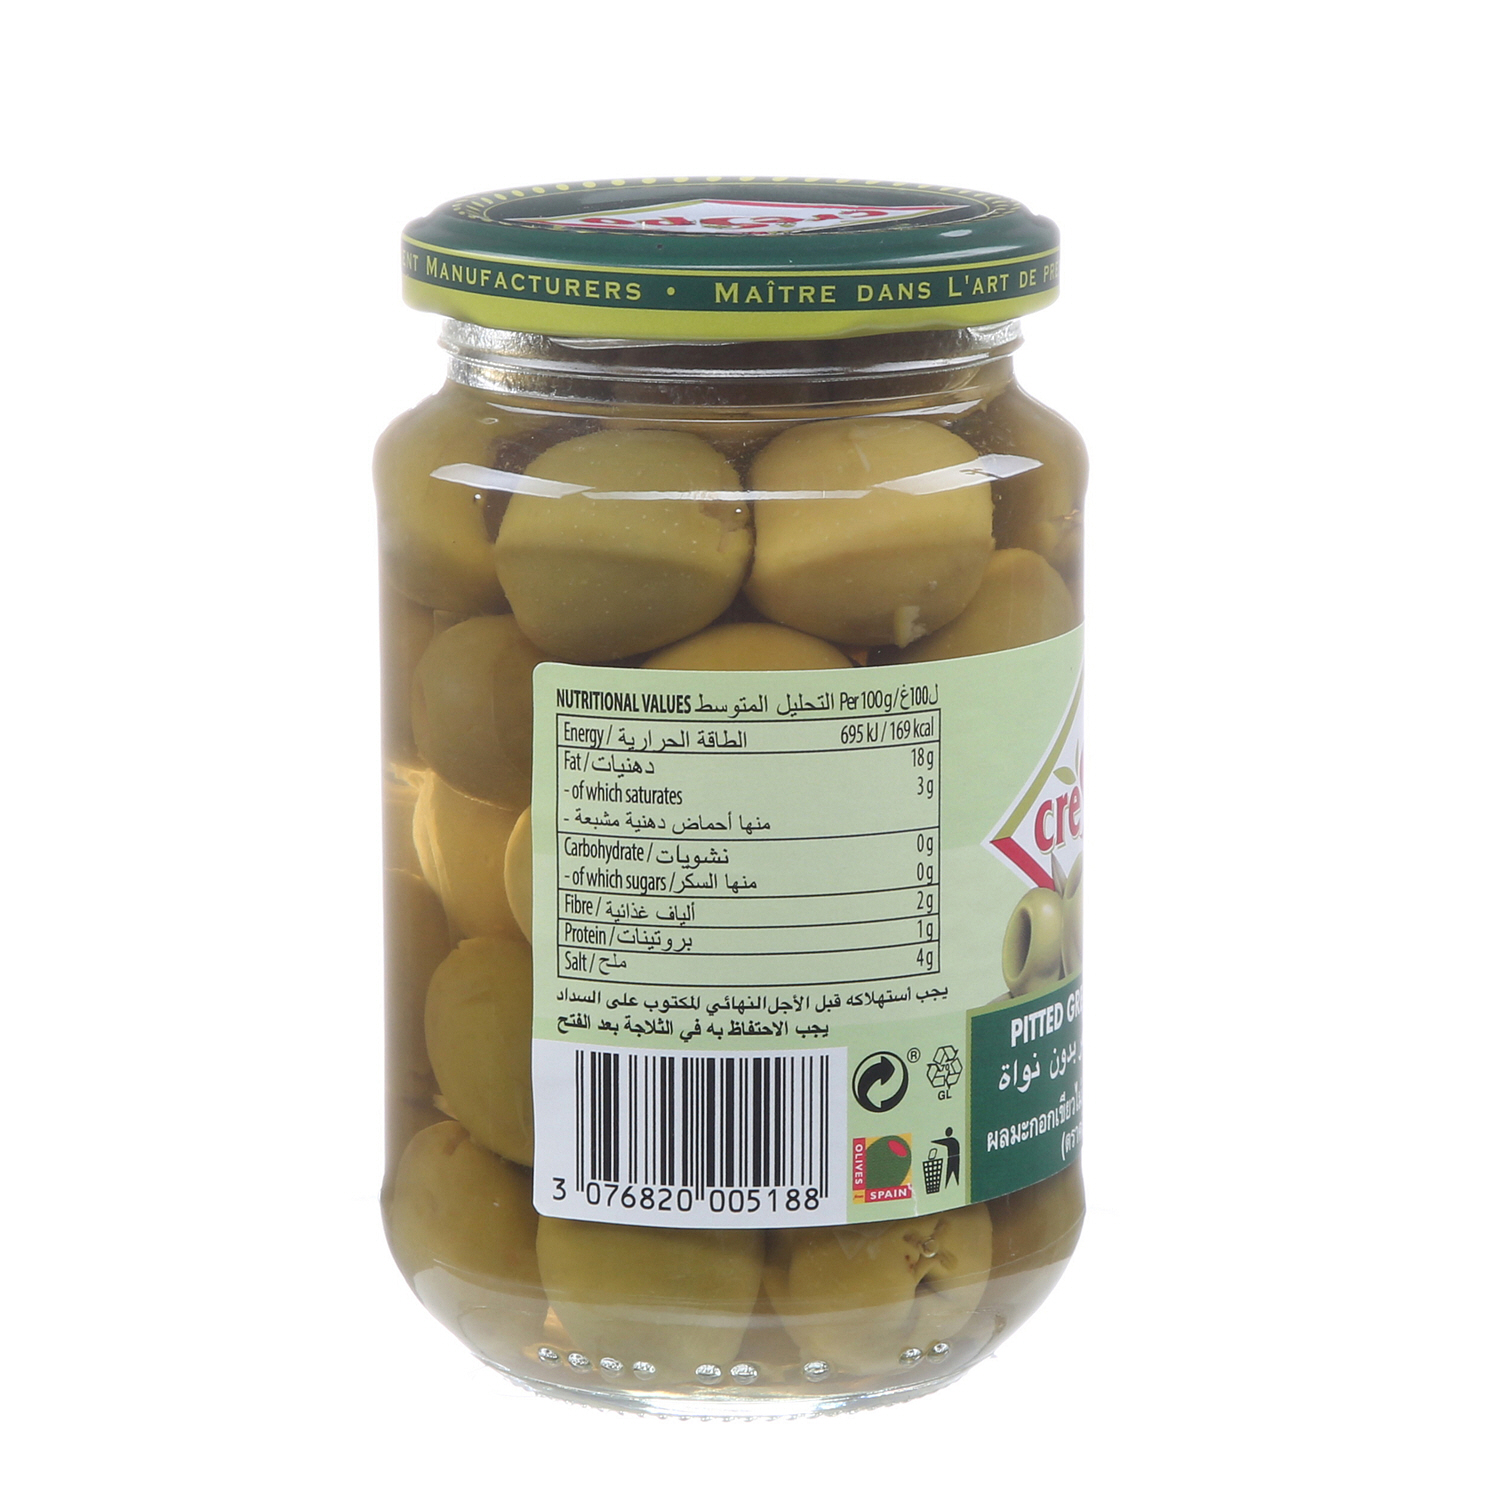 Crespo Pitted Green Olives Jar 160 g